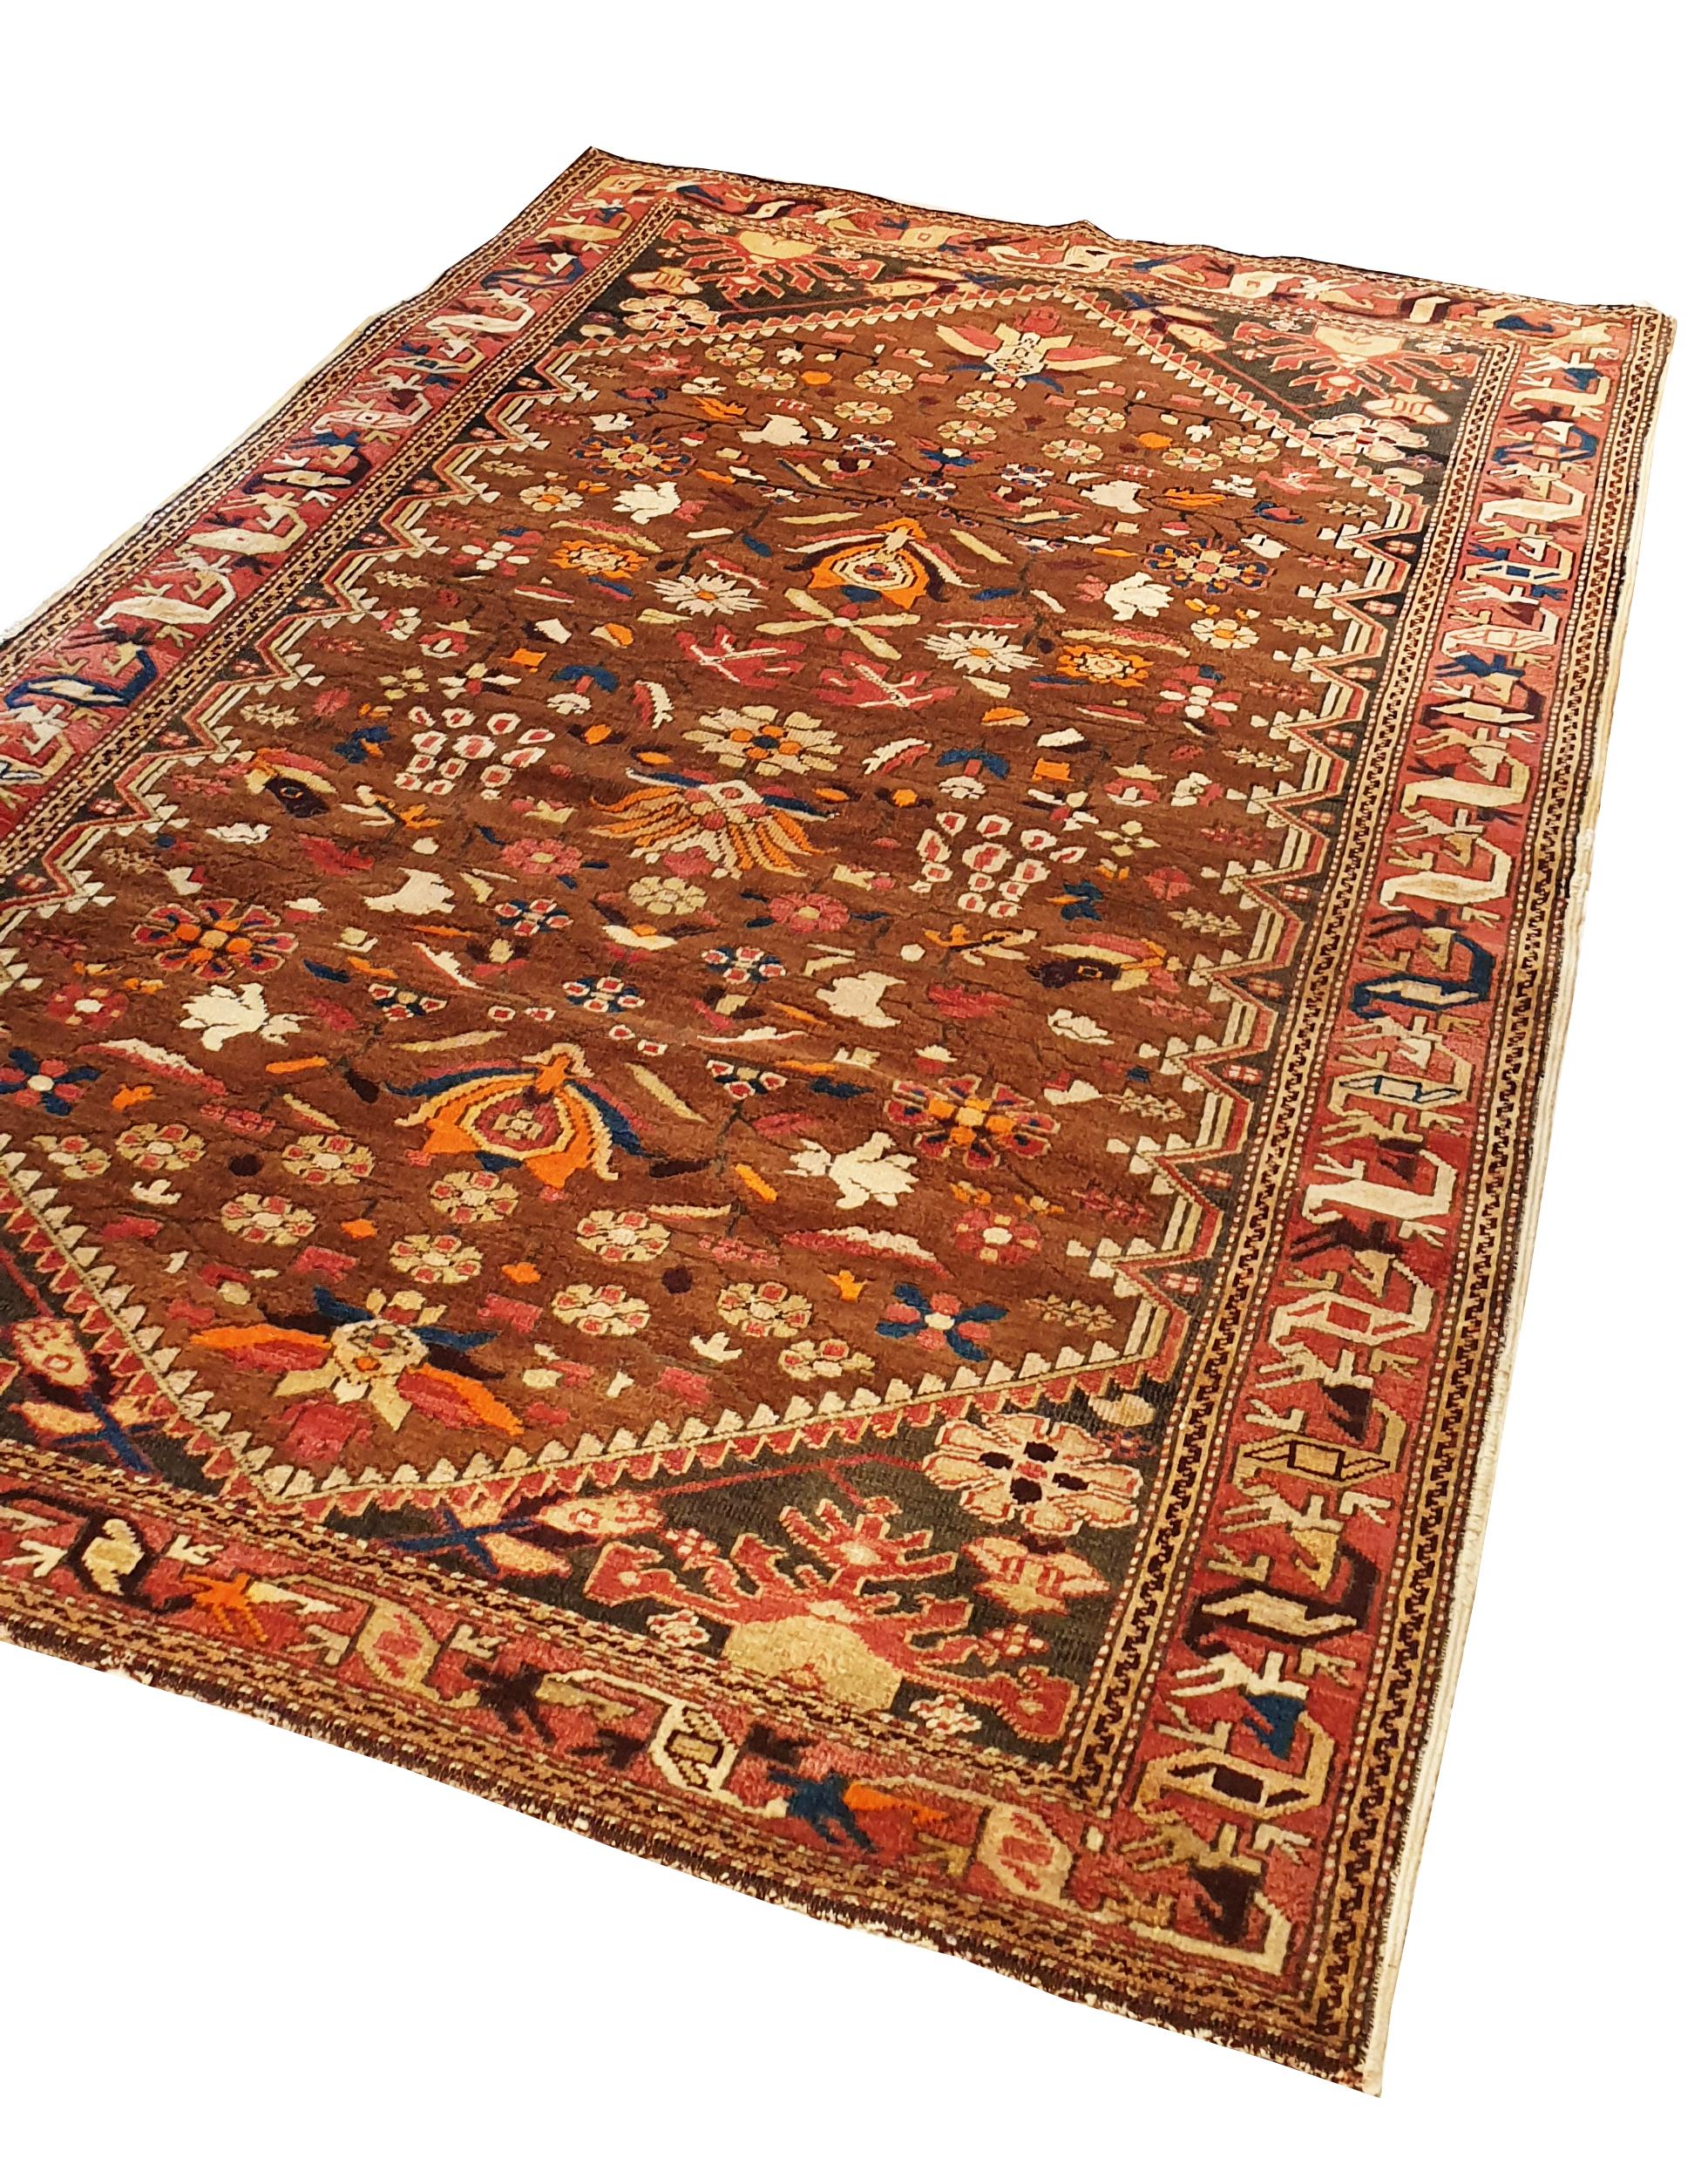 Hand knotted rug in Caucasian region at the beginning of the 20th century.
Representation of flowers and tribal draws.
Of great quality, beautiful graphics .

Perfect state of preservation.

Dimensions : 168 x 110 cm